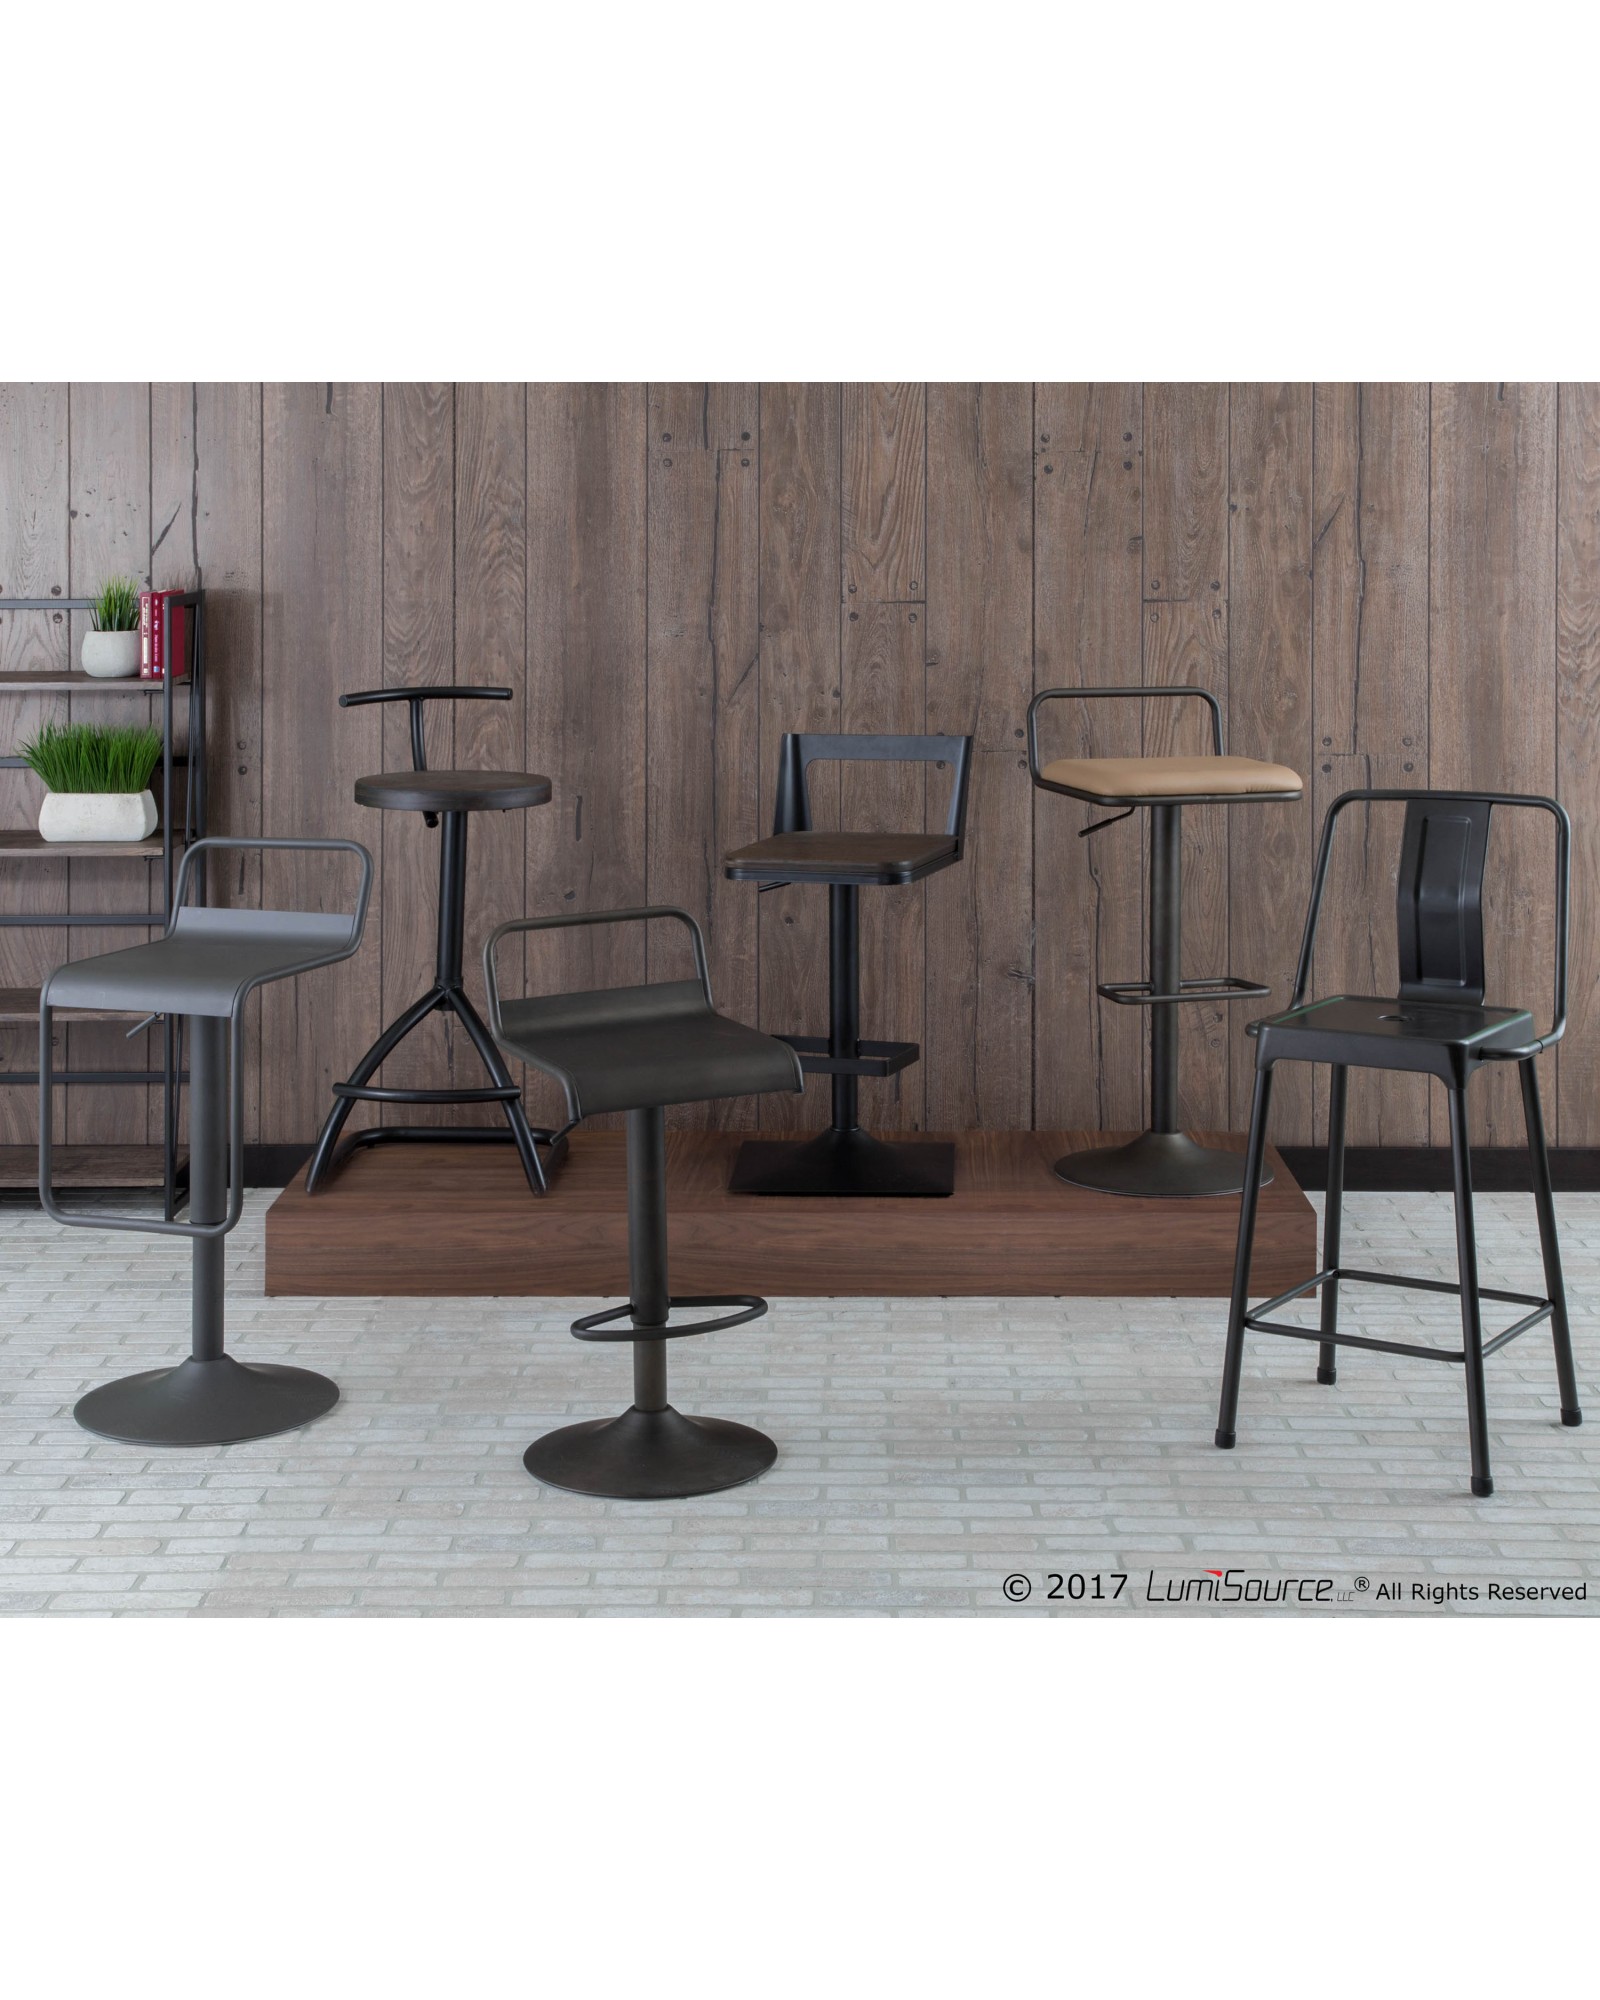 Emery Uptown Industrial Adjustable Barstool with Swivel in Matte Grey